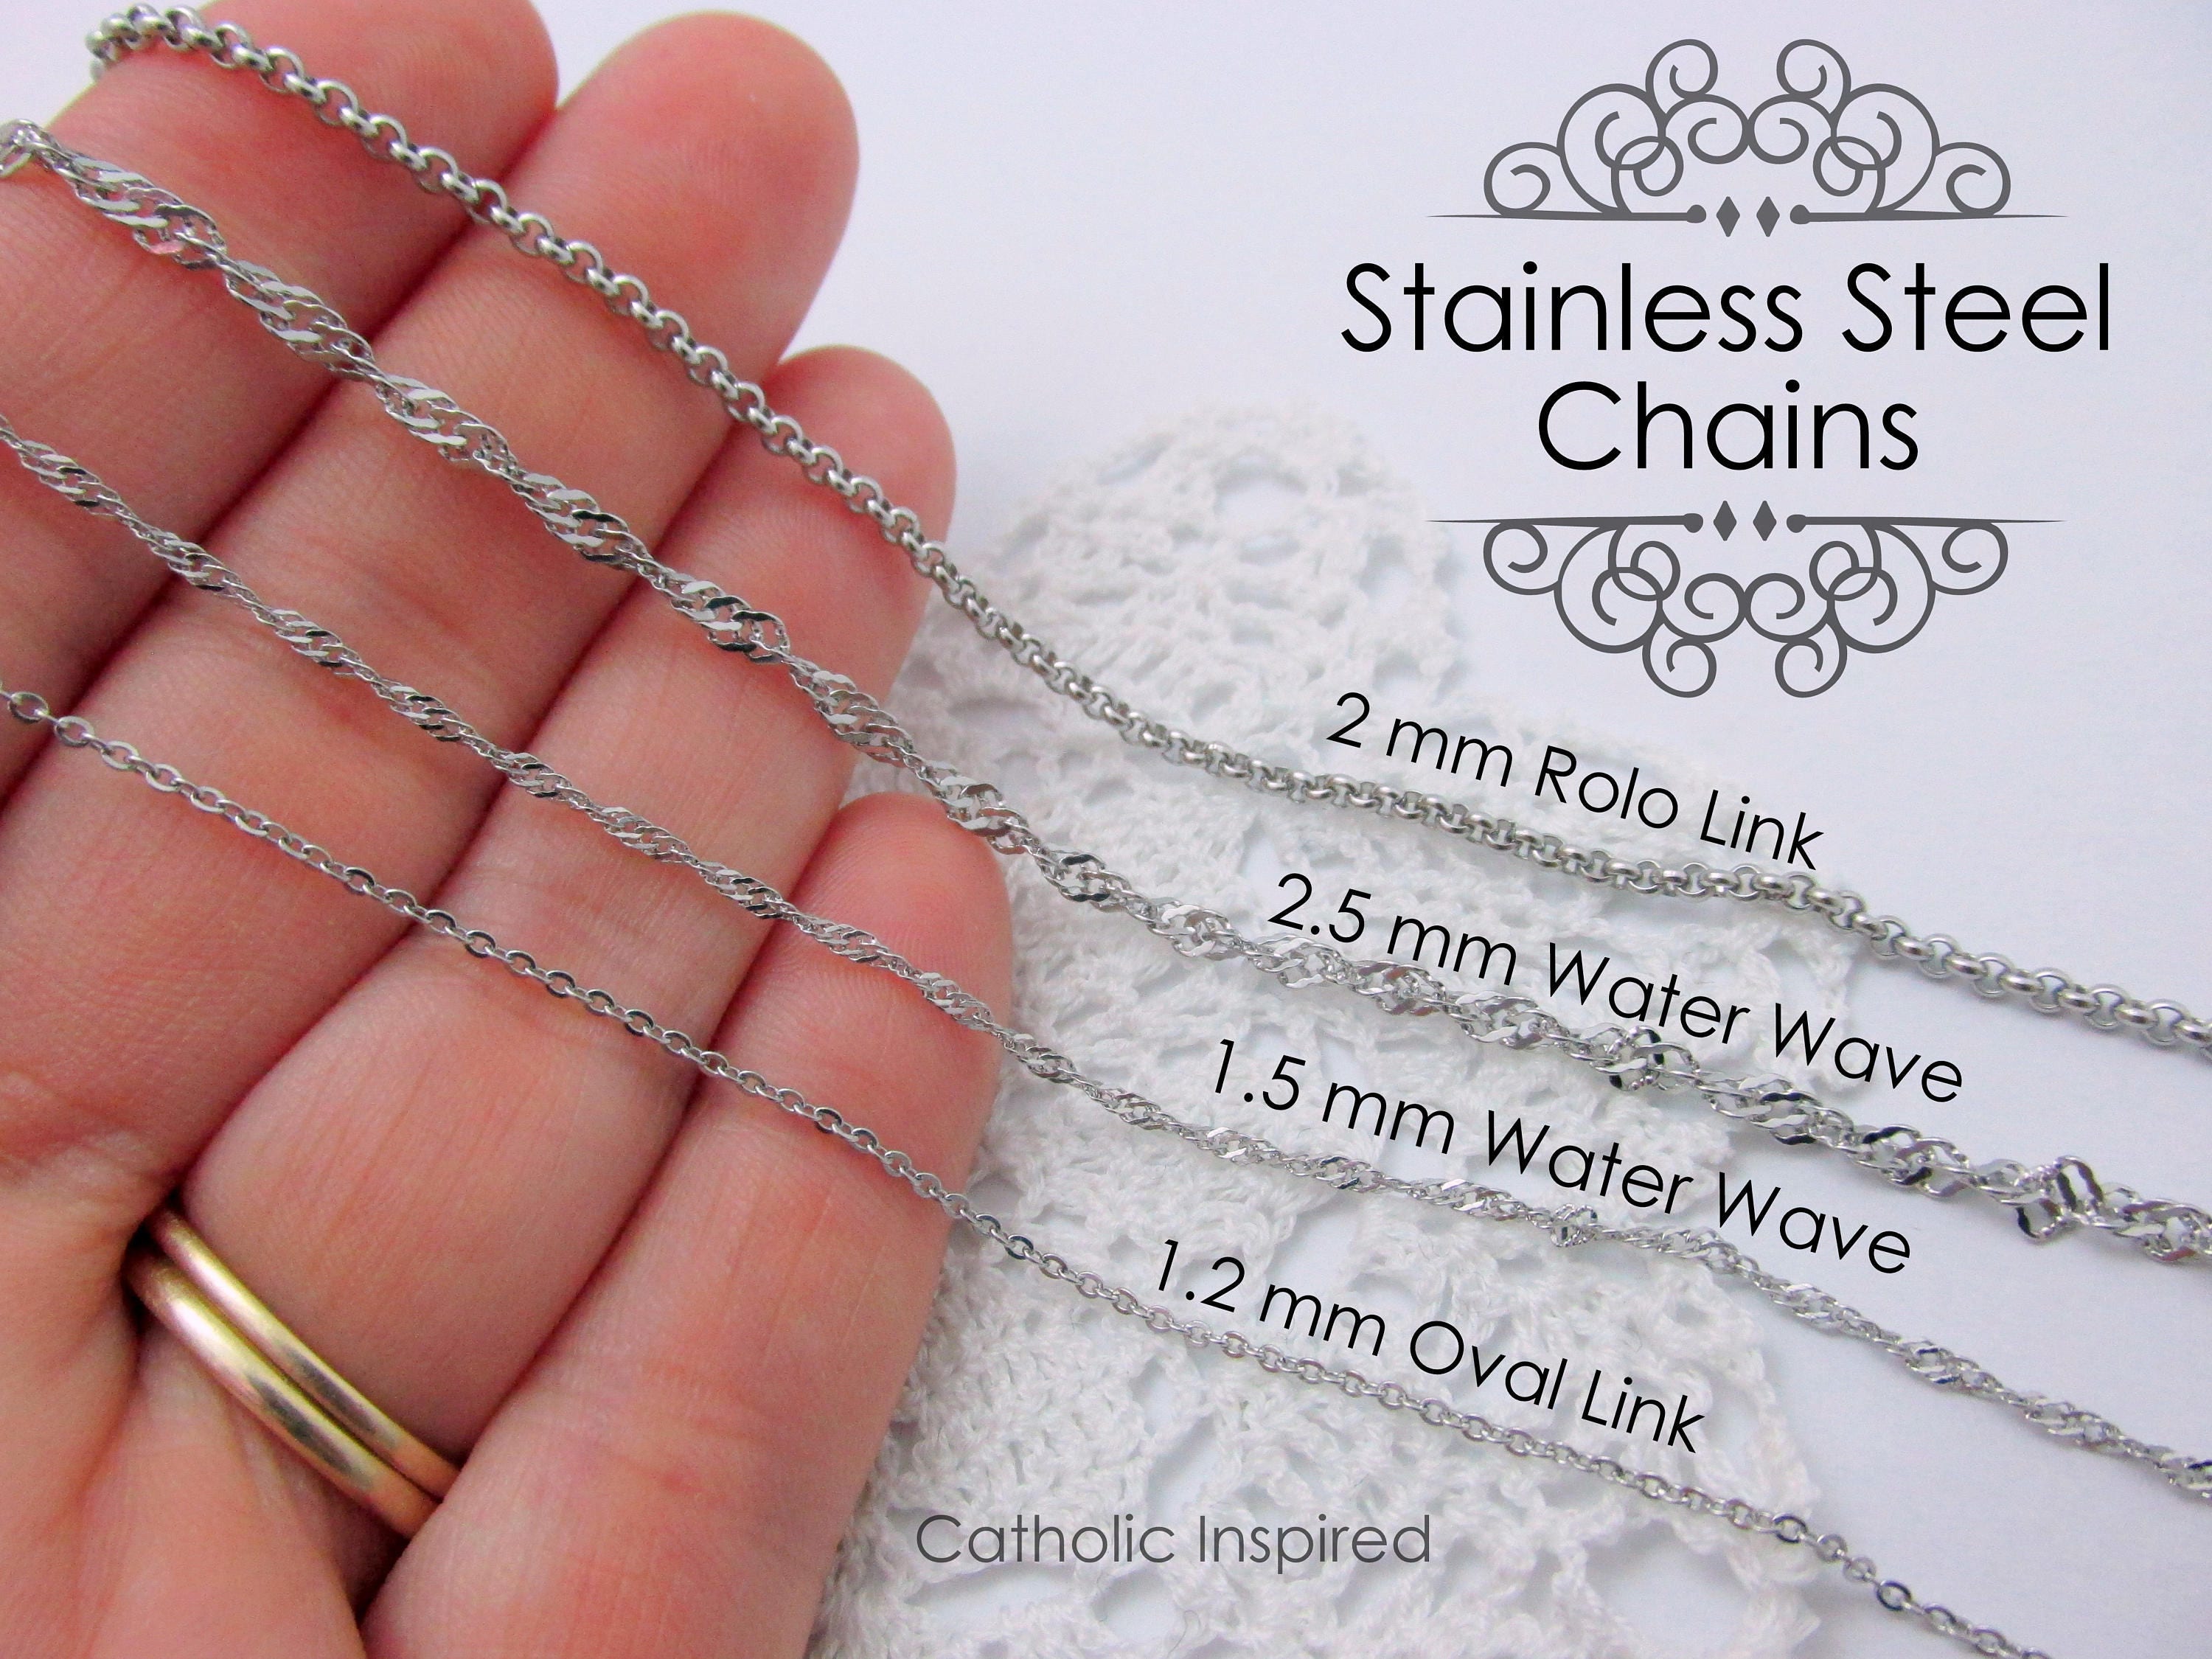 100% Stainless Steel Sm. Miraculous Medal Cross Heart and Chain - Our Lady Necklace Latin - Mary - Blessed Mother - Mini Dainty Small Simple